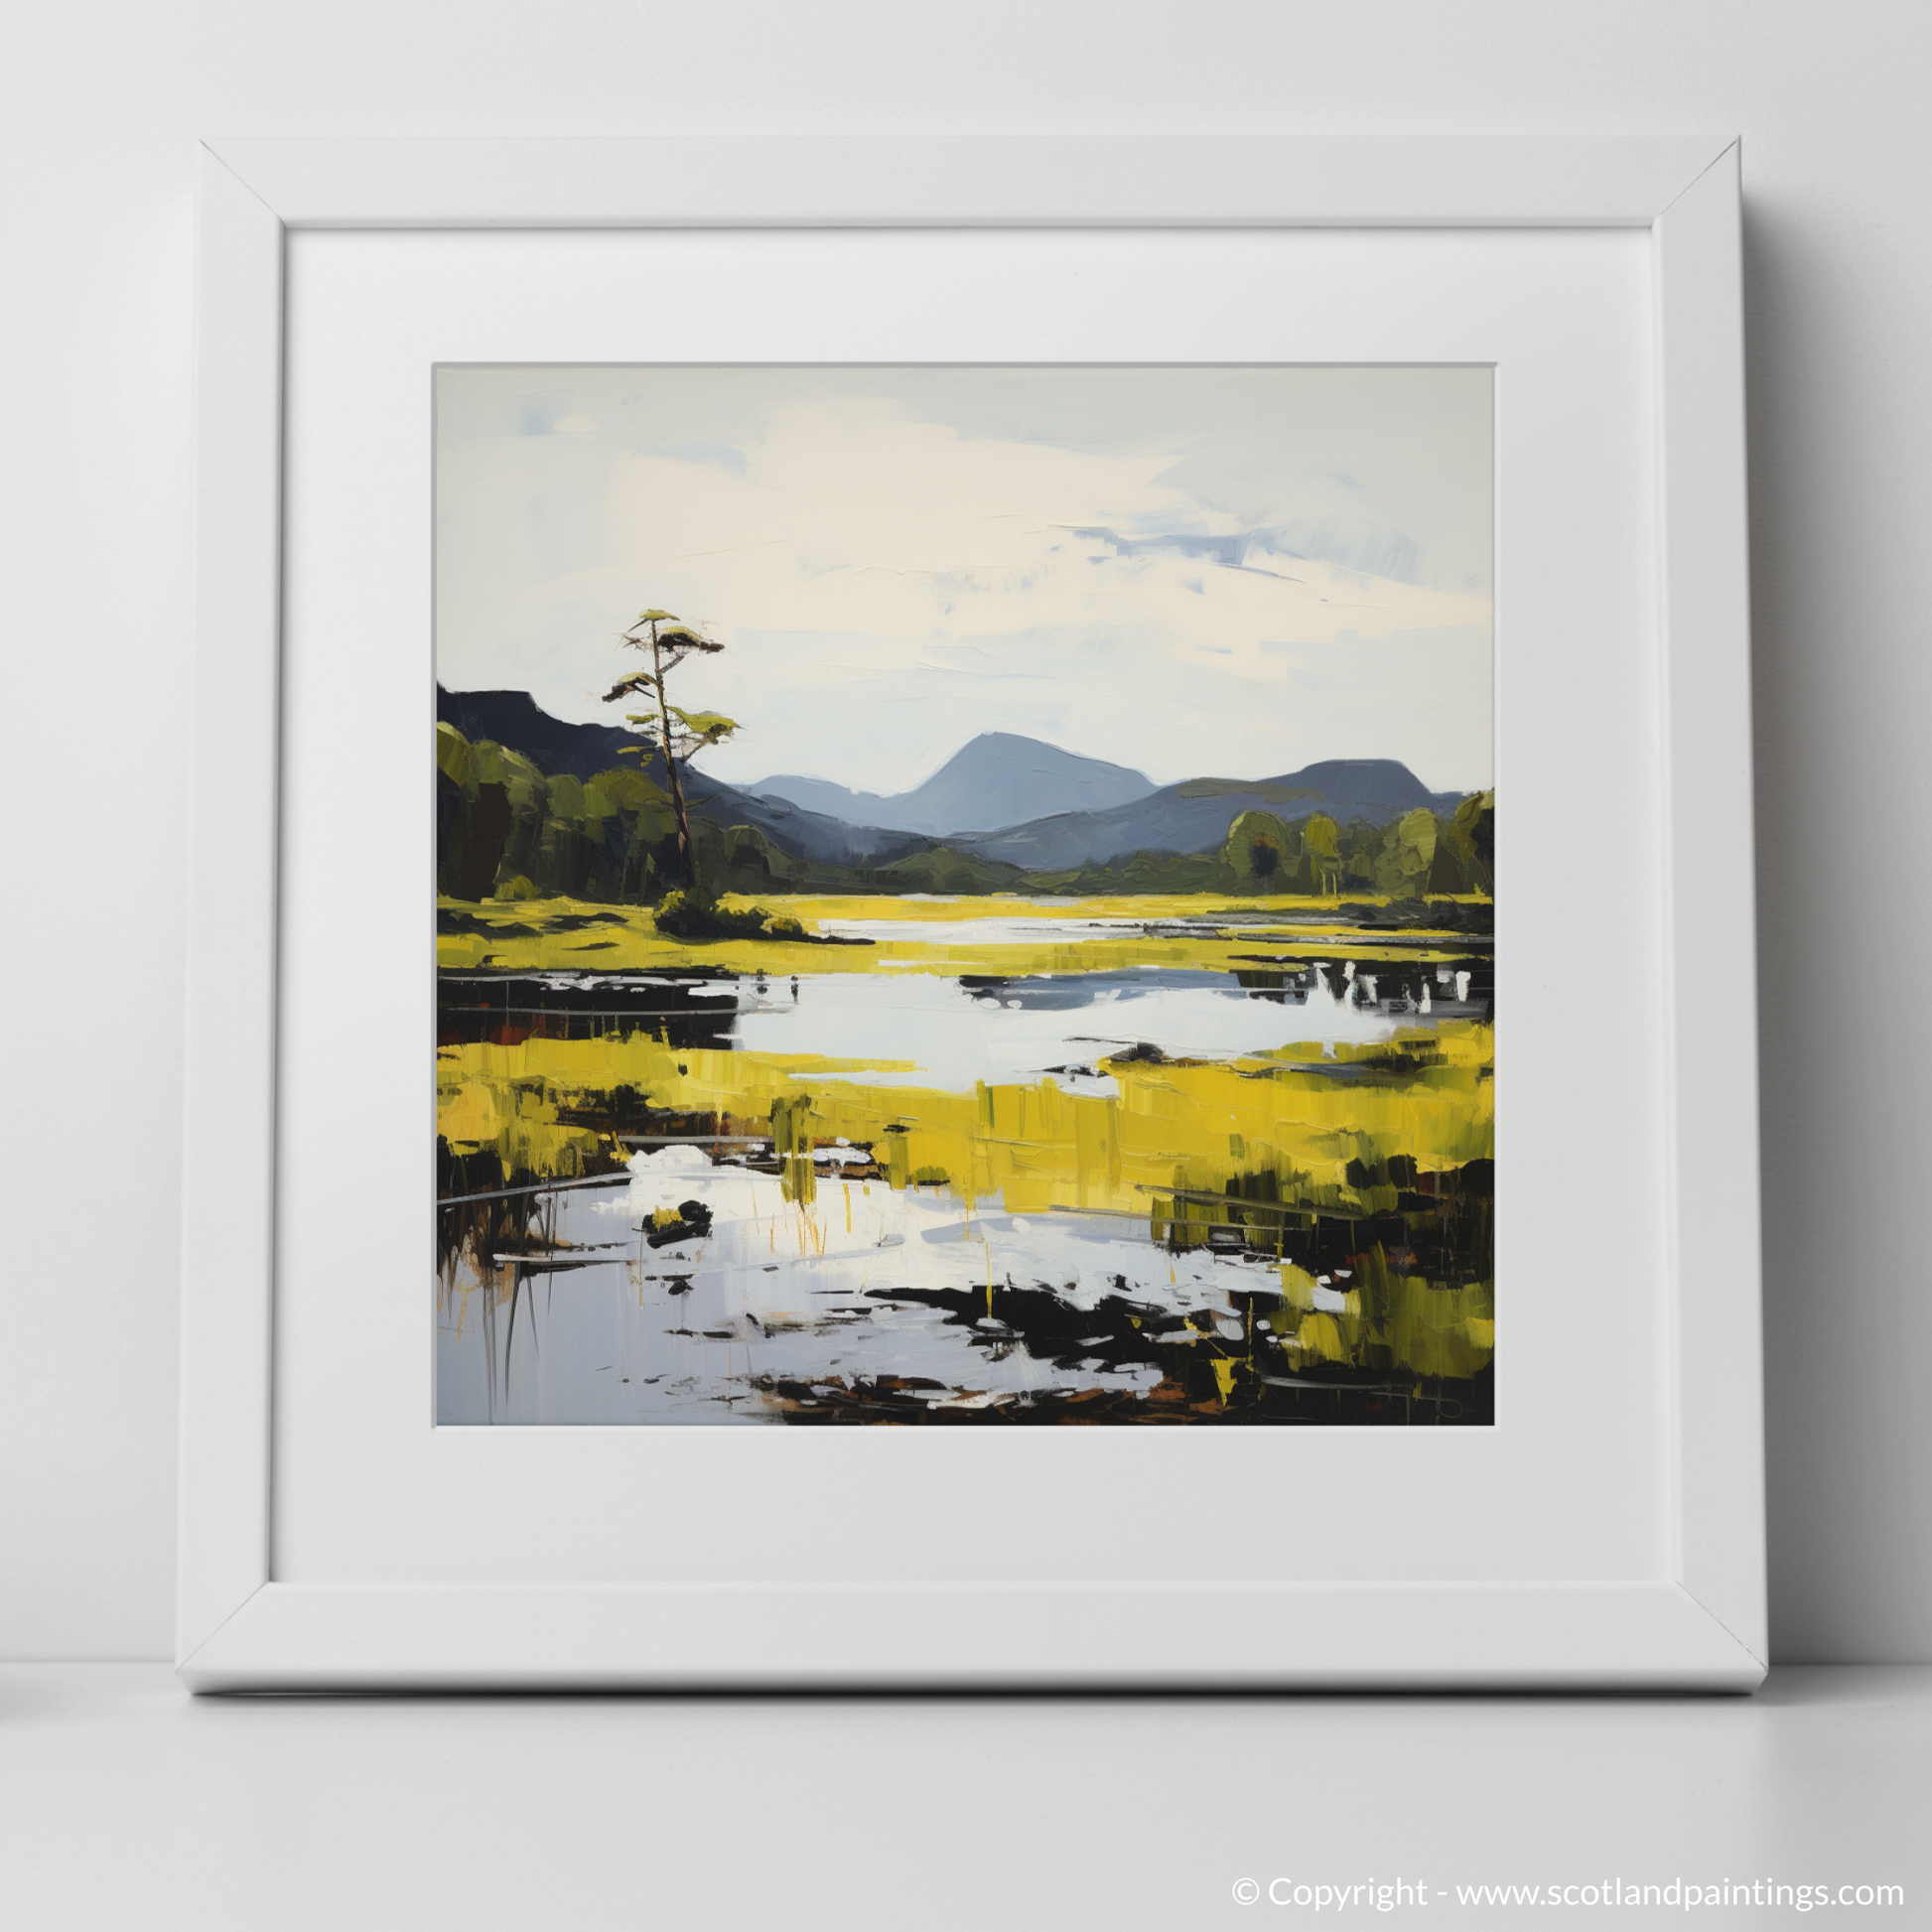 Art Print of Loch Ard, Stirling in summer with a white frame